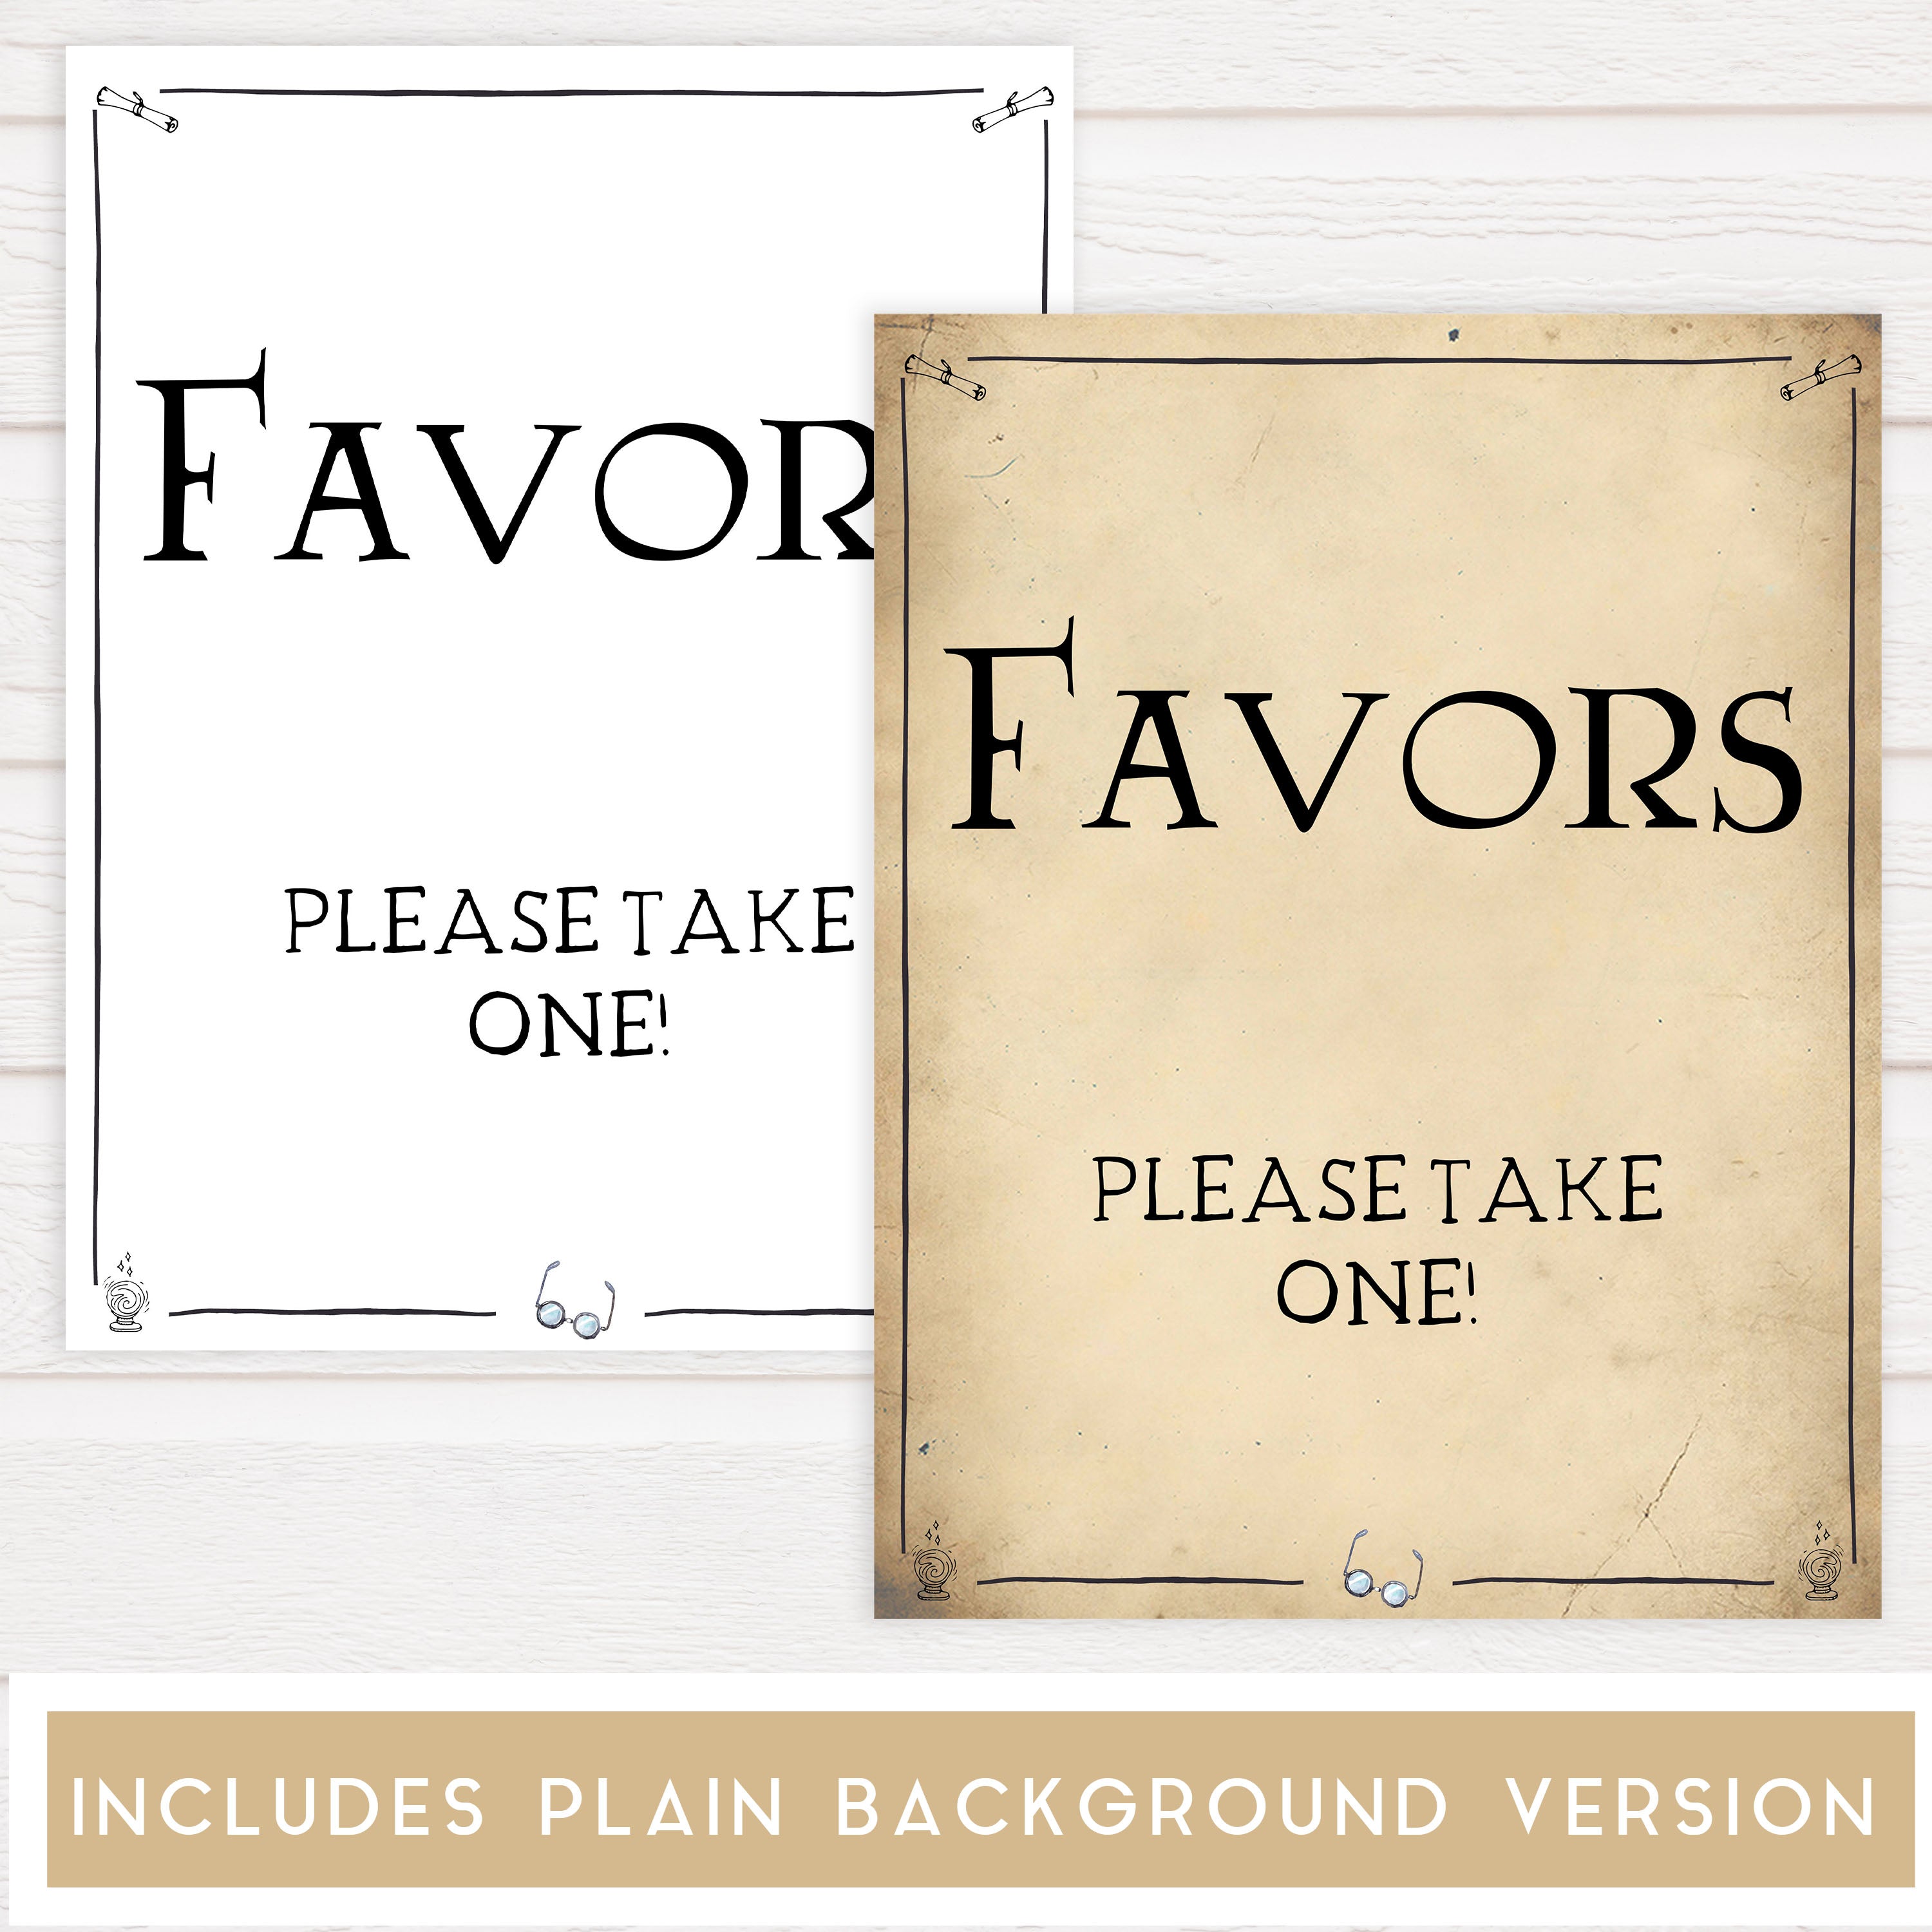 favors bridal signs, favors wedding table signs, Printable bridal shower signs, Harry Potter bridal shower decor, Harry Potter bridal shower decor ideas, fun bridal shower decor, bridal shower game ideas, Harry Potter bridal shower ideas